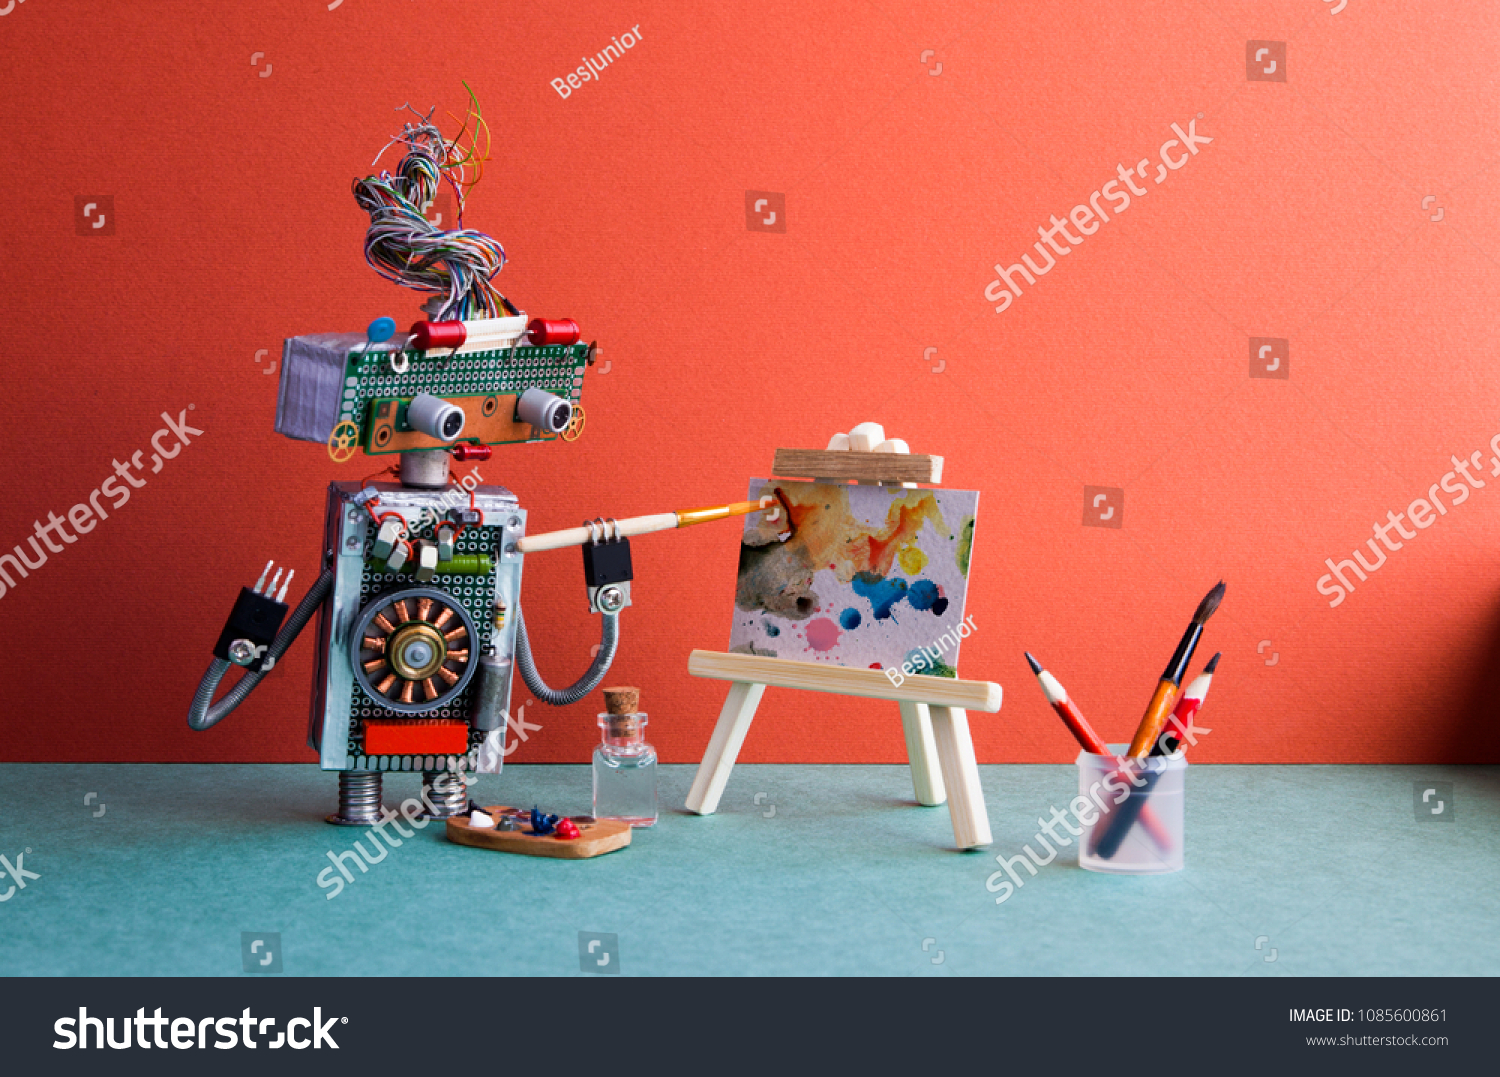 Talented robot artist paints an abstract picture with watercolors. Wooden easel and artist's tools palette, pencils case. Advertising poster studio school of visual arts interior.  #1085600861